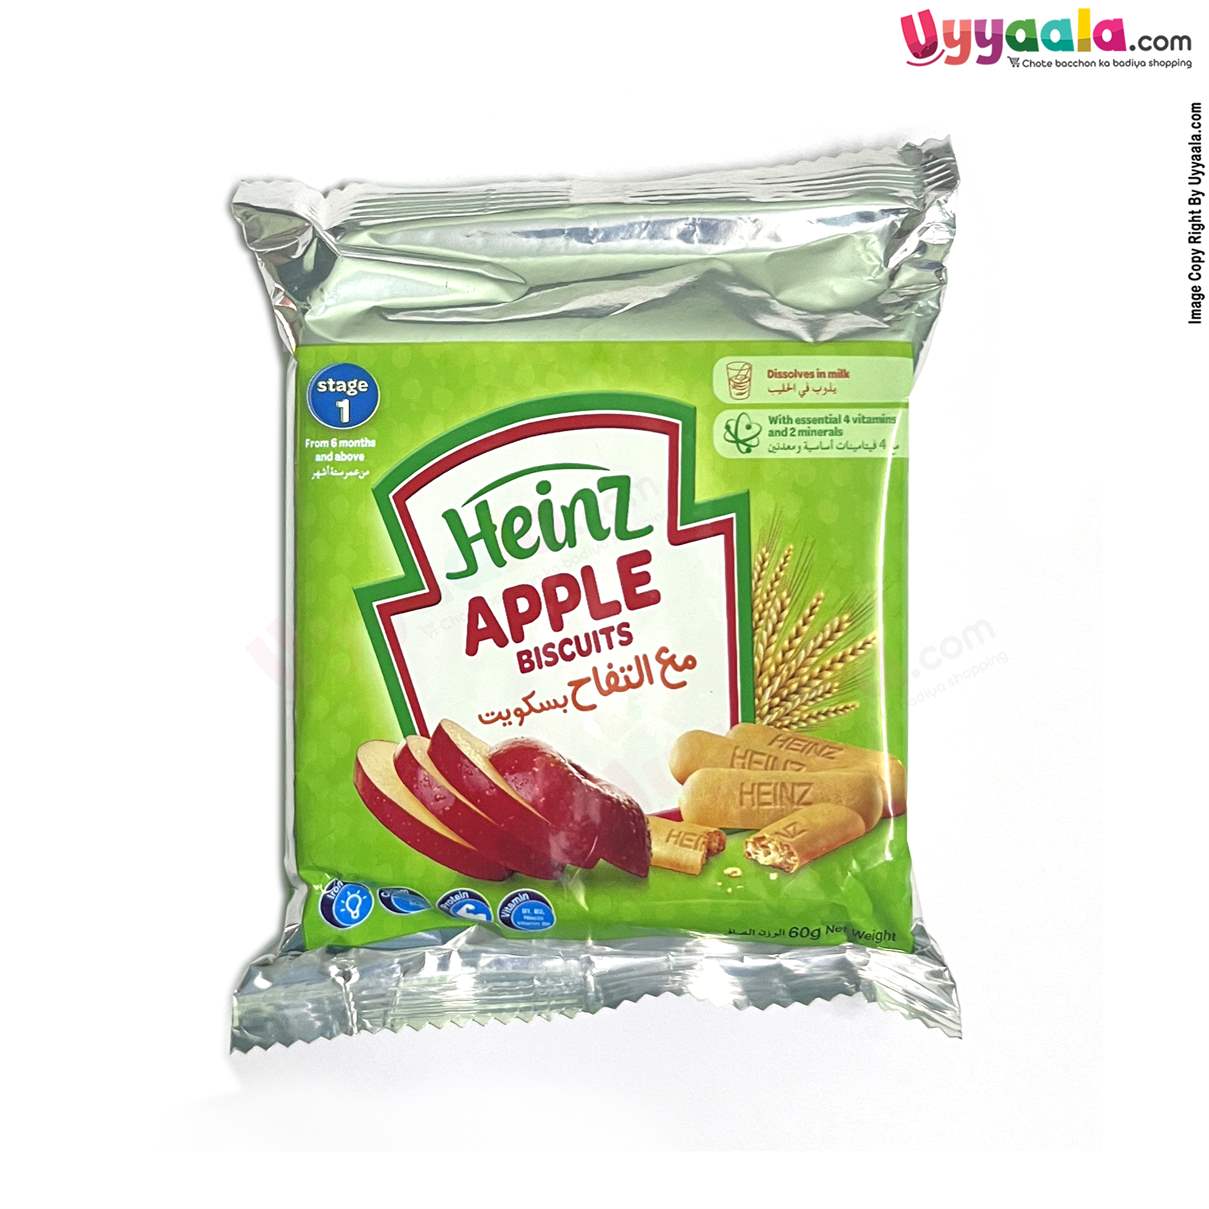 HEINZ Apple Biscuits for Kids - Stage 1, 60g